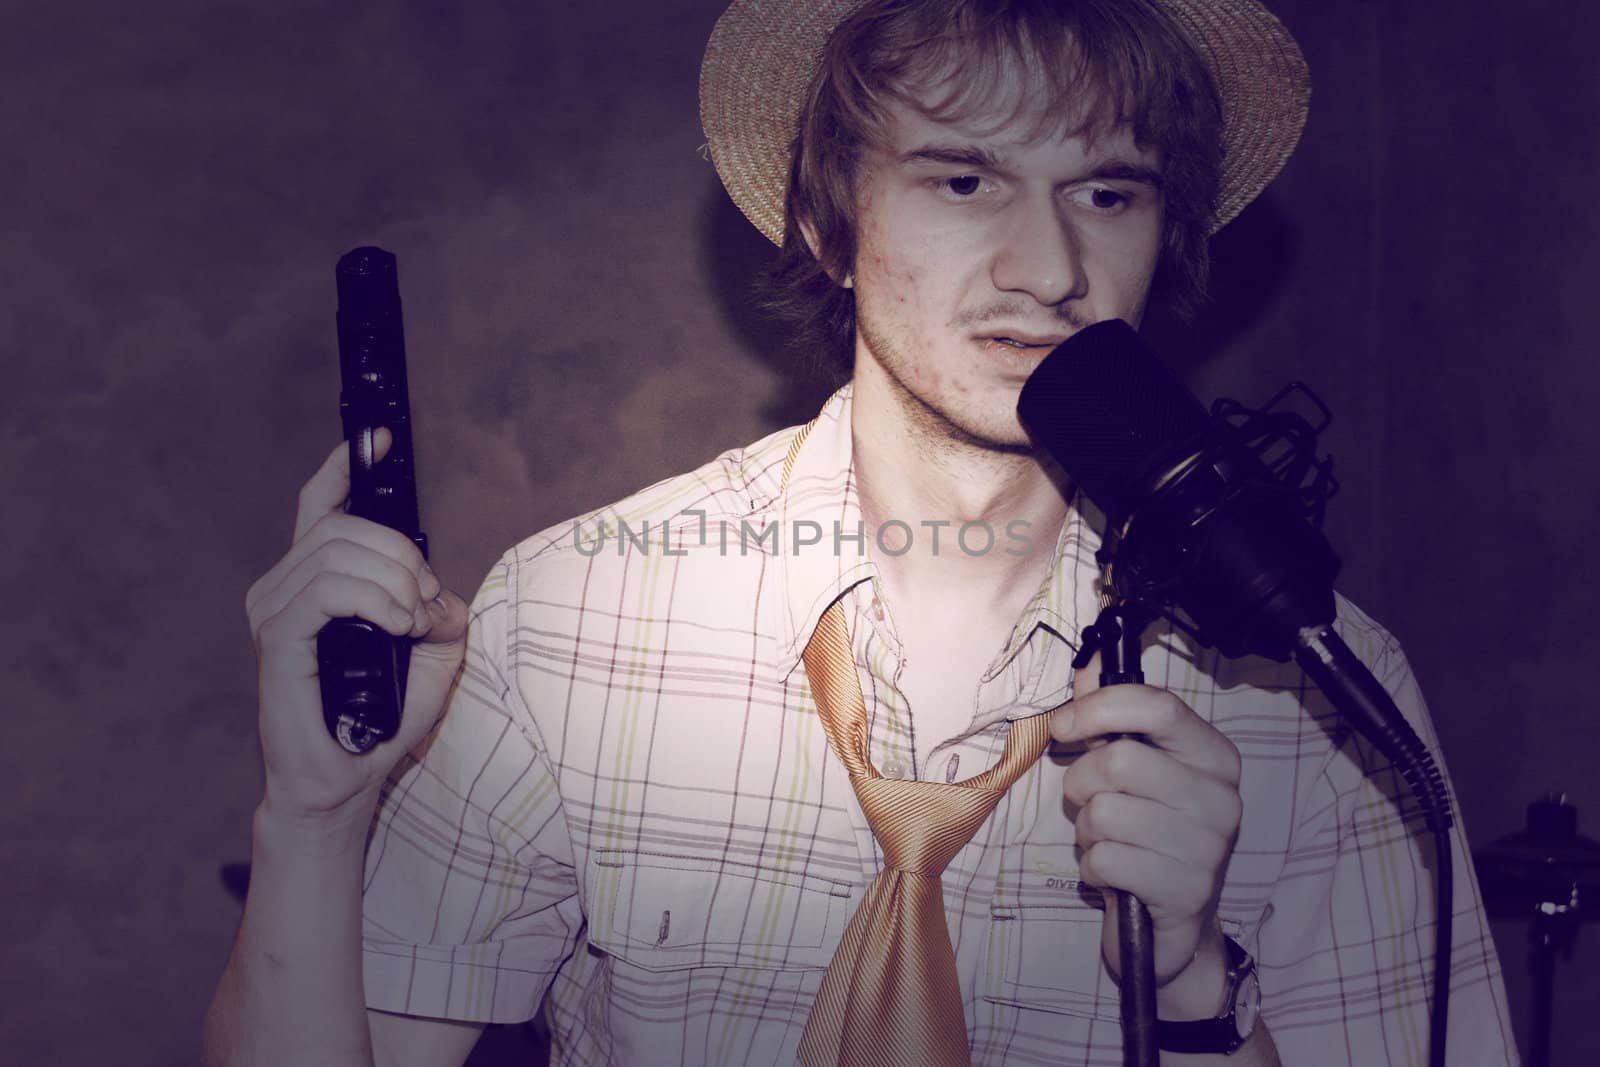 Young music man with gun